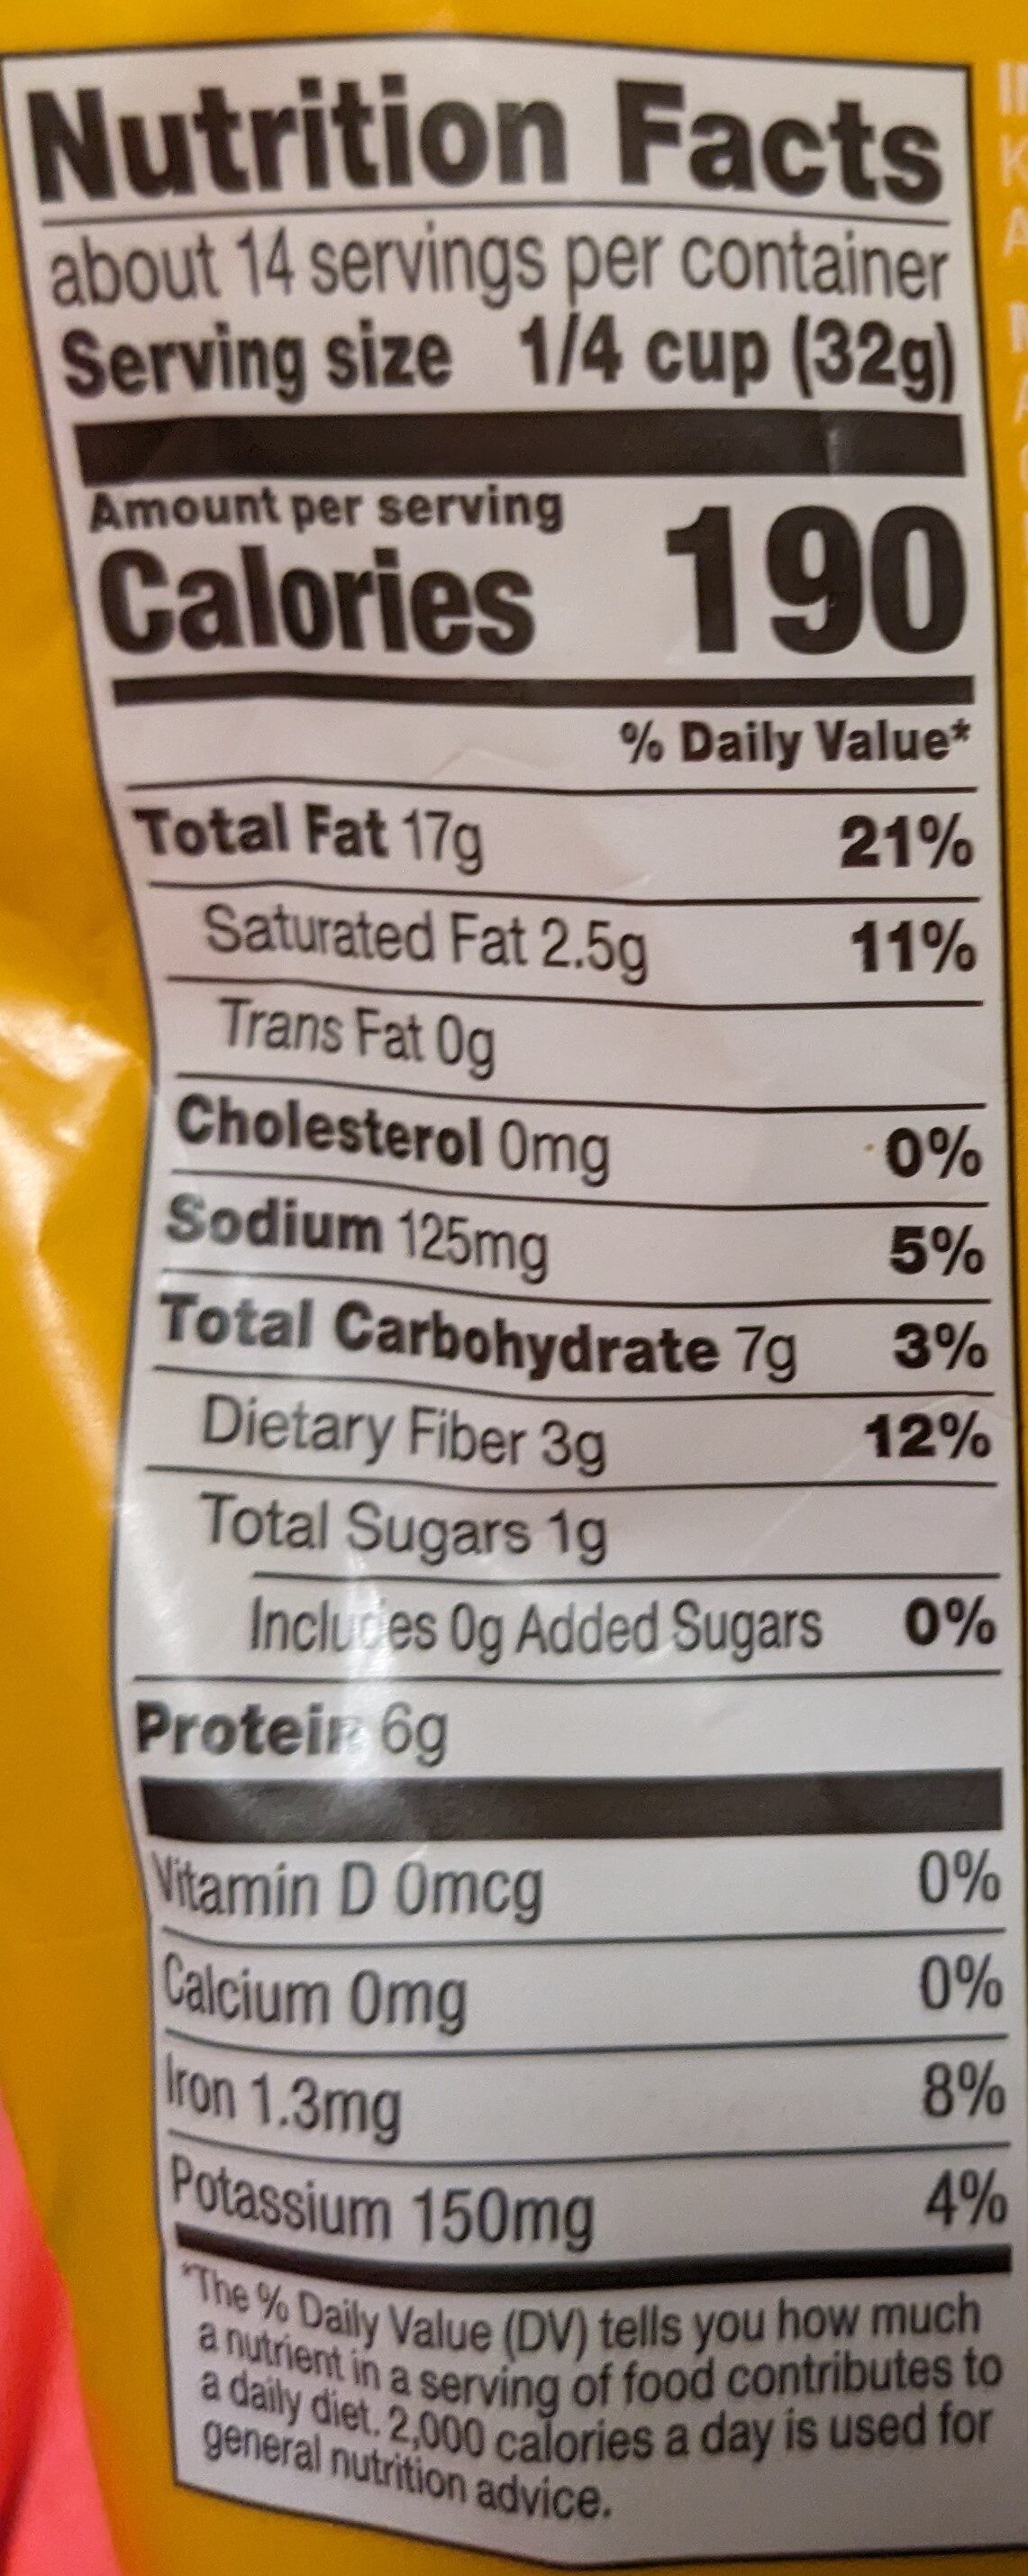 Roasted Salted Sunflower Kernels - Nutrition facts